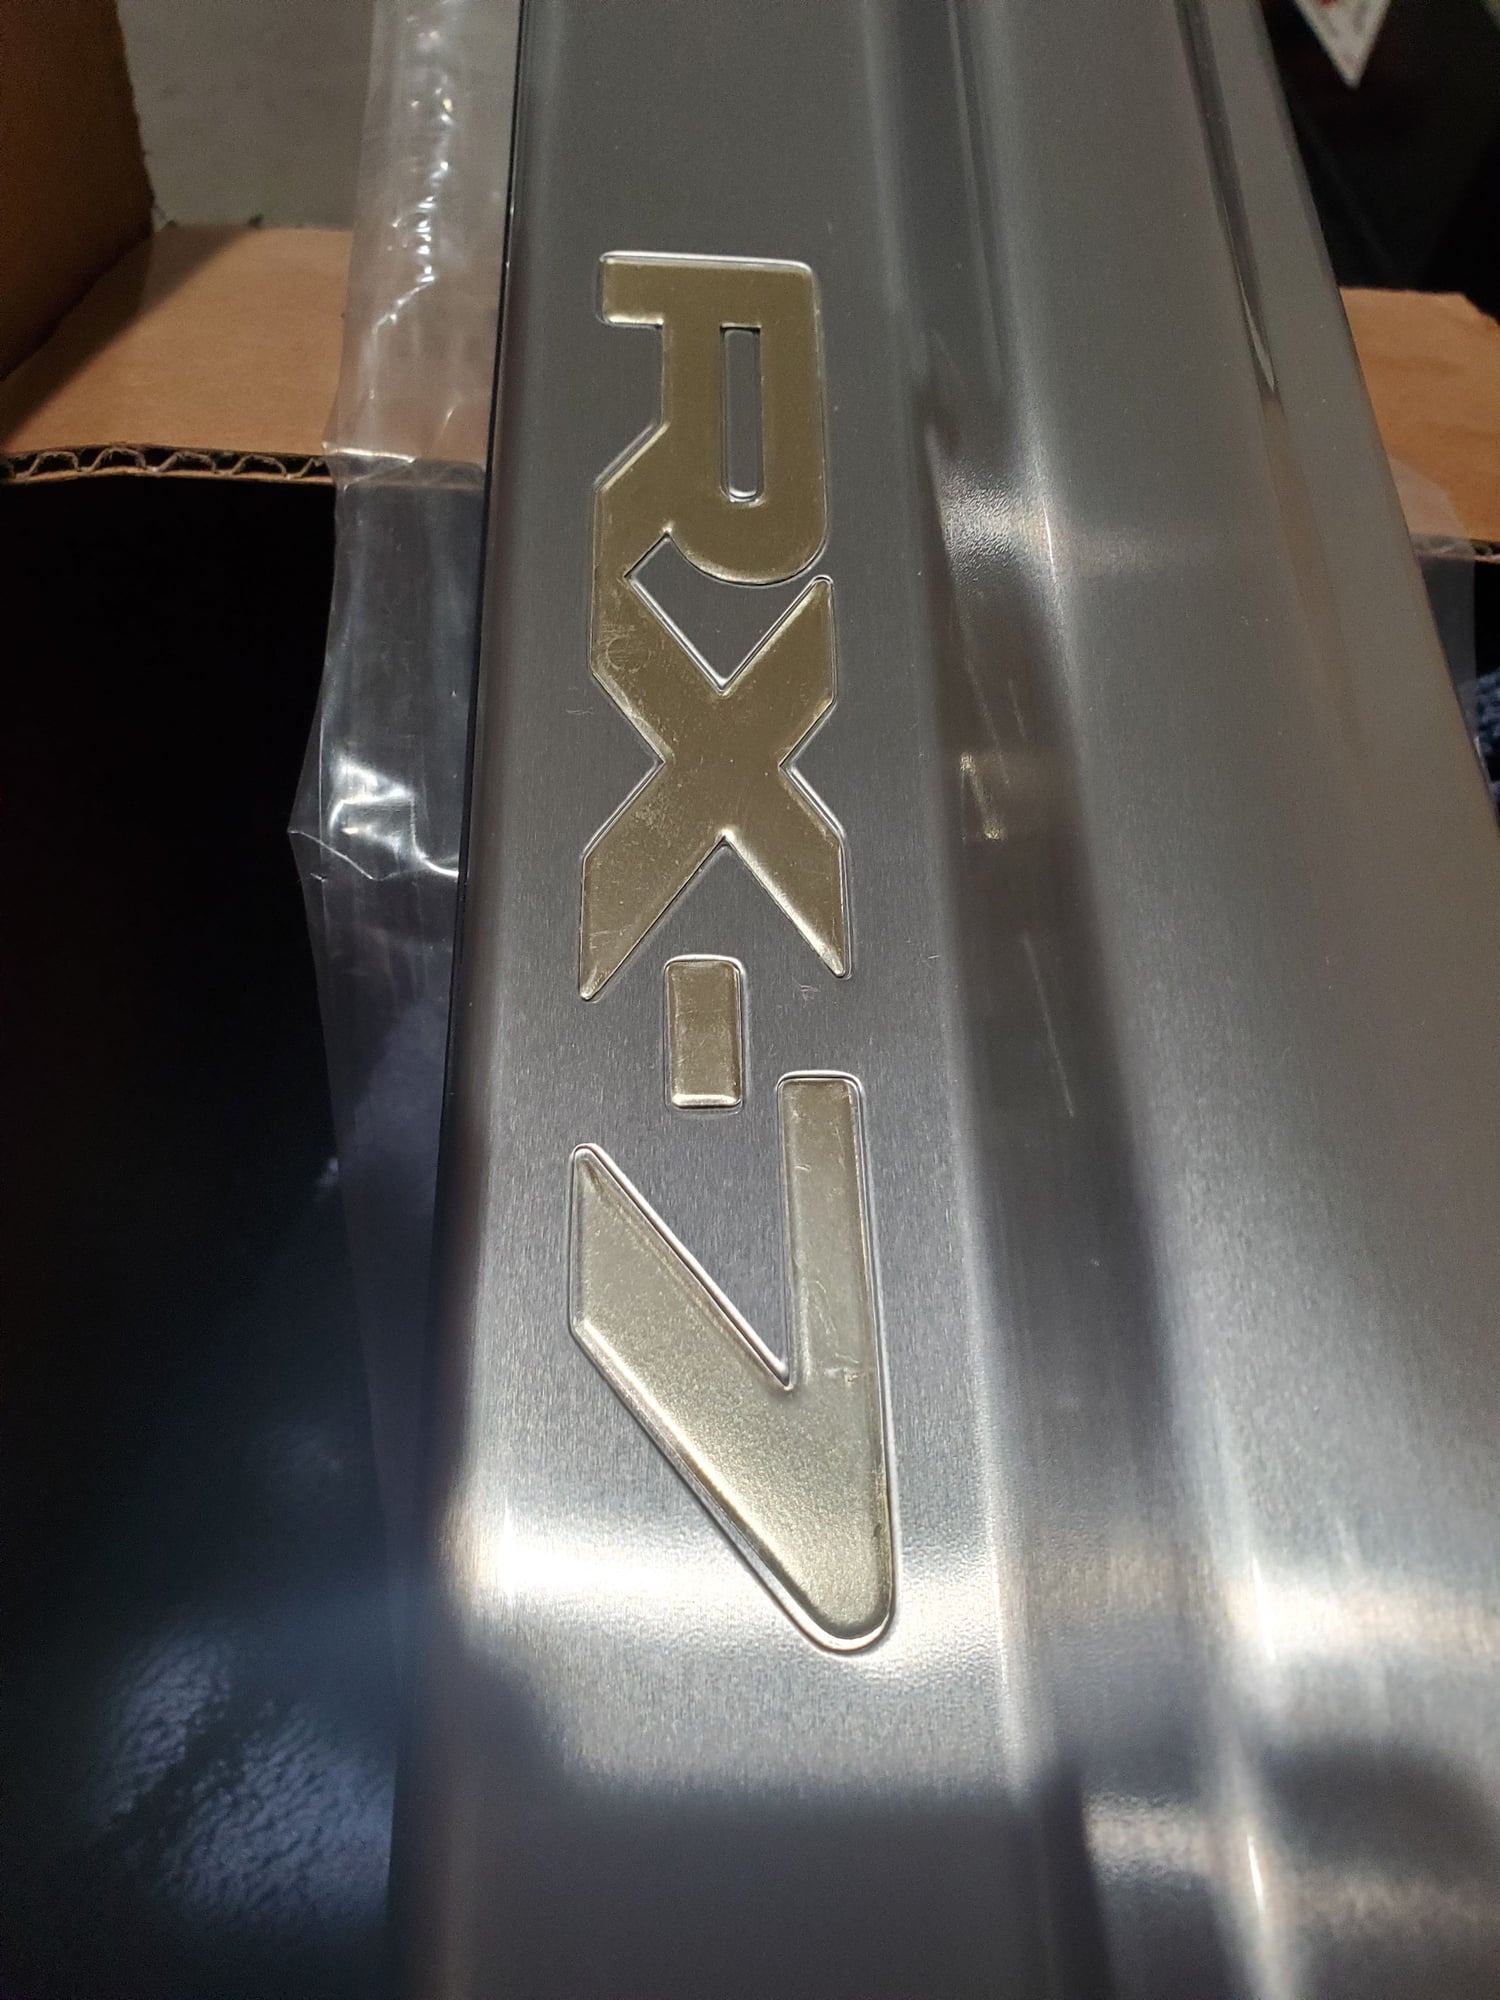 Interior/Upholstery - BNIB oem stainless steel side sills - New - 1993 to 1995 Mazda RX-7 - Desert Hot Springs, CA 92240, United States